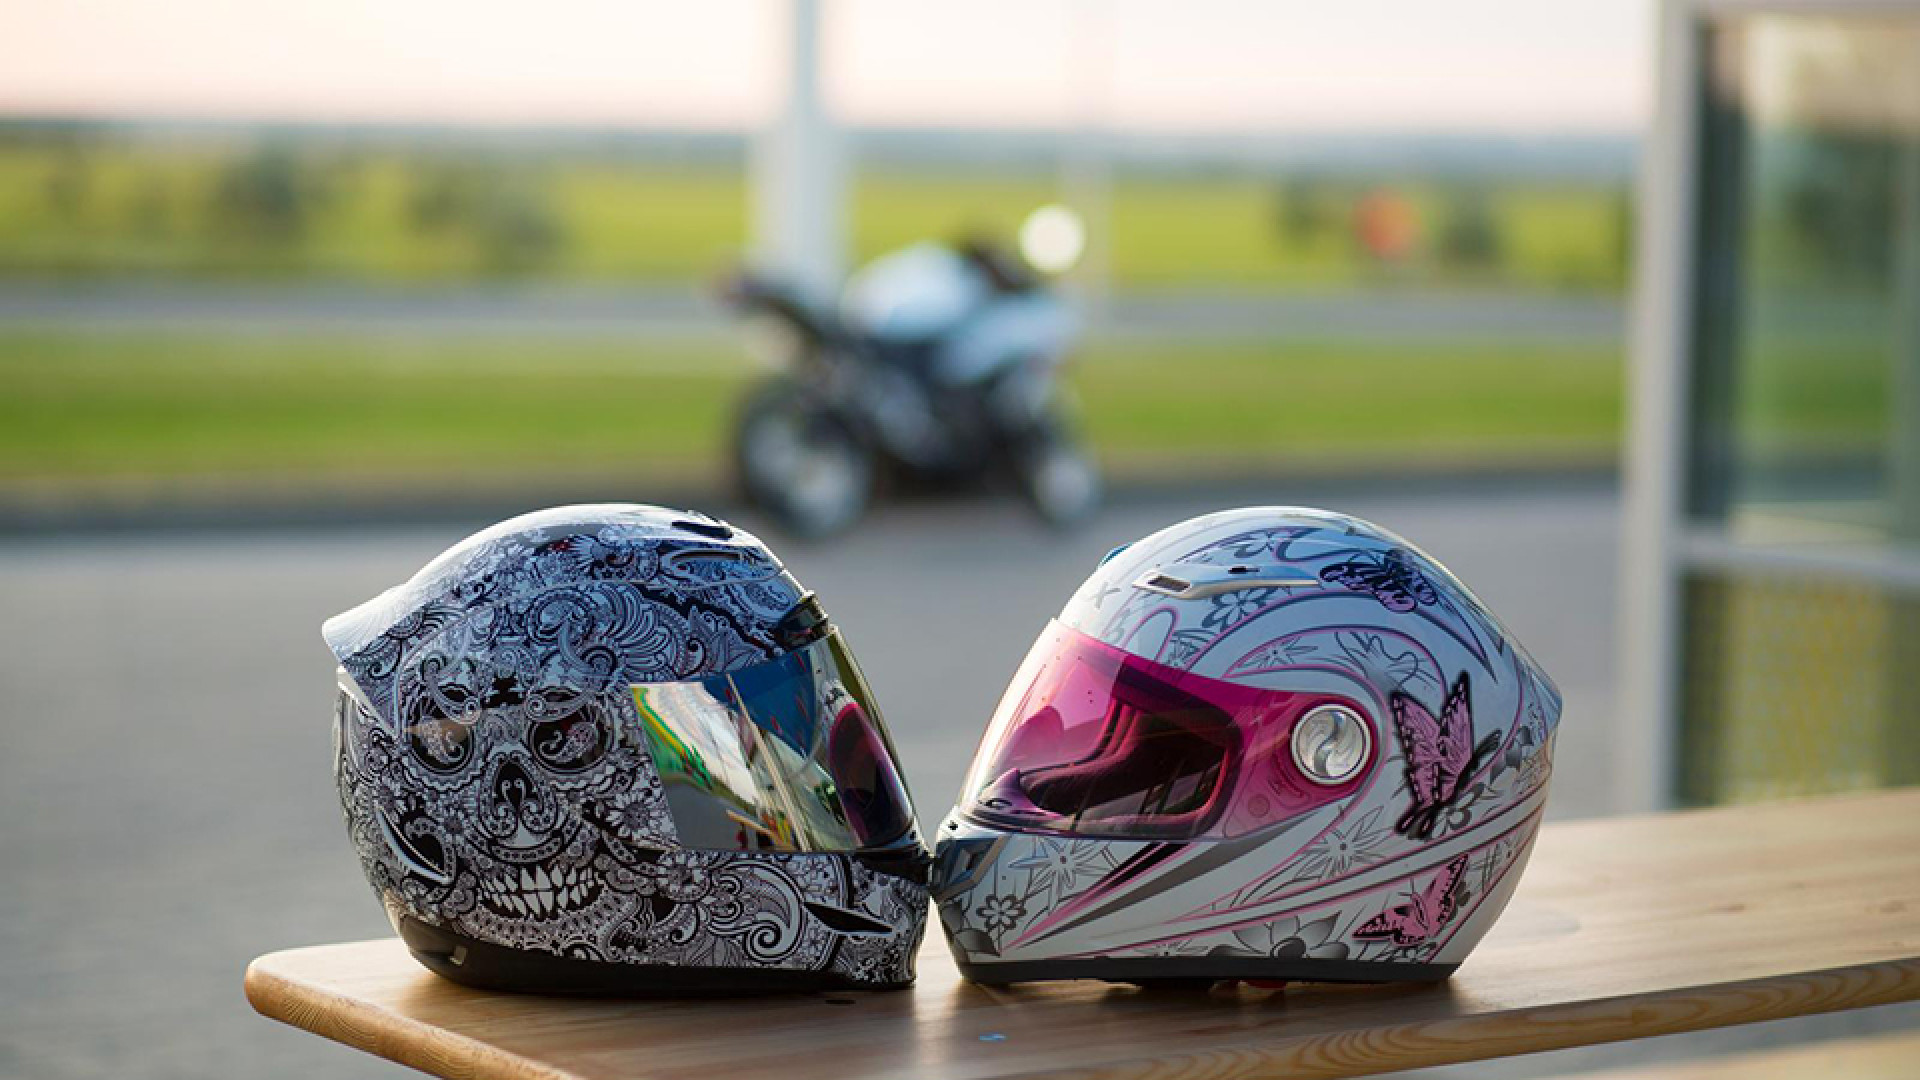 https://www.raceleathers.co.uk/image/cache/catalog/Blog%20Images/What%20To%20Consider%20Choosing%20Motorcycle%20Helmets%20960x540-1920x1080.jpg